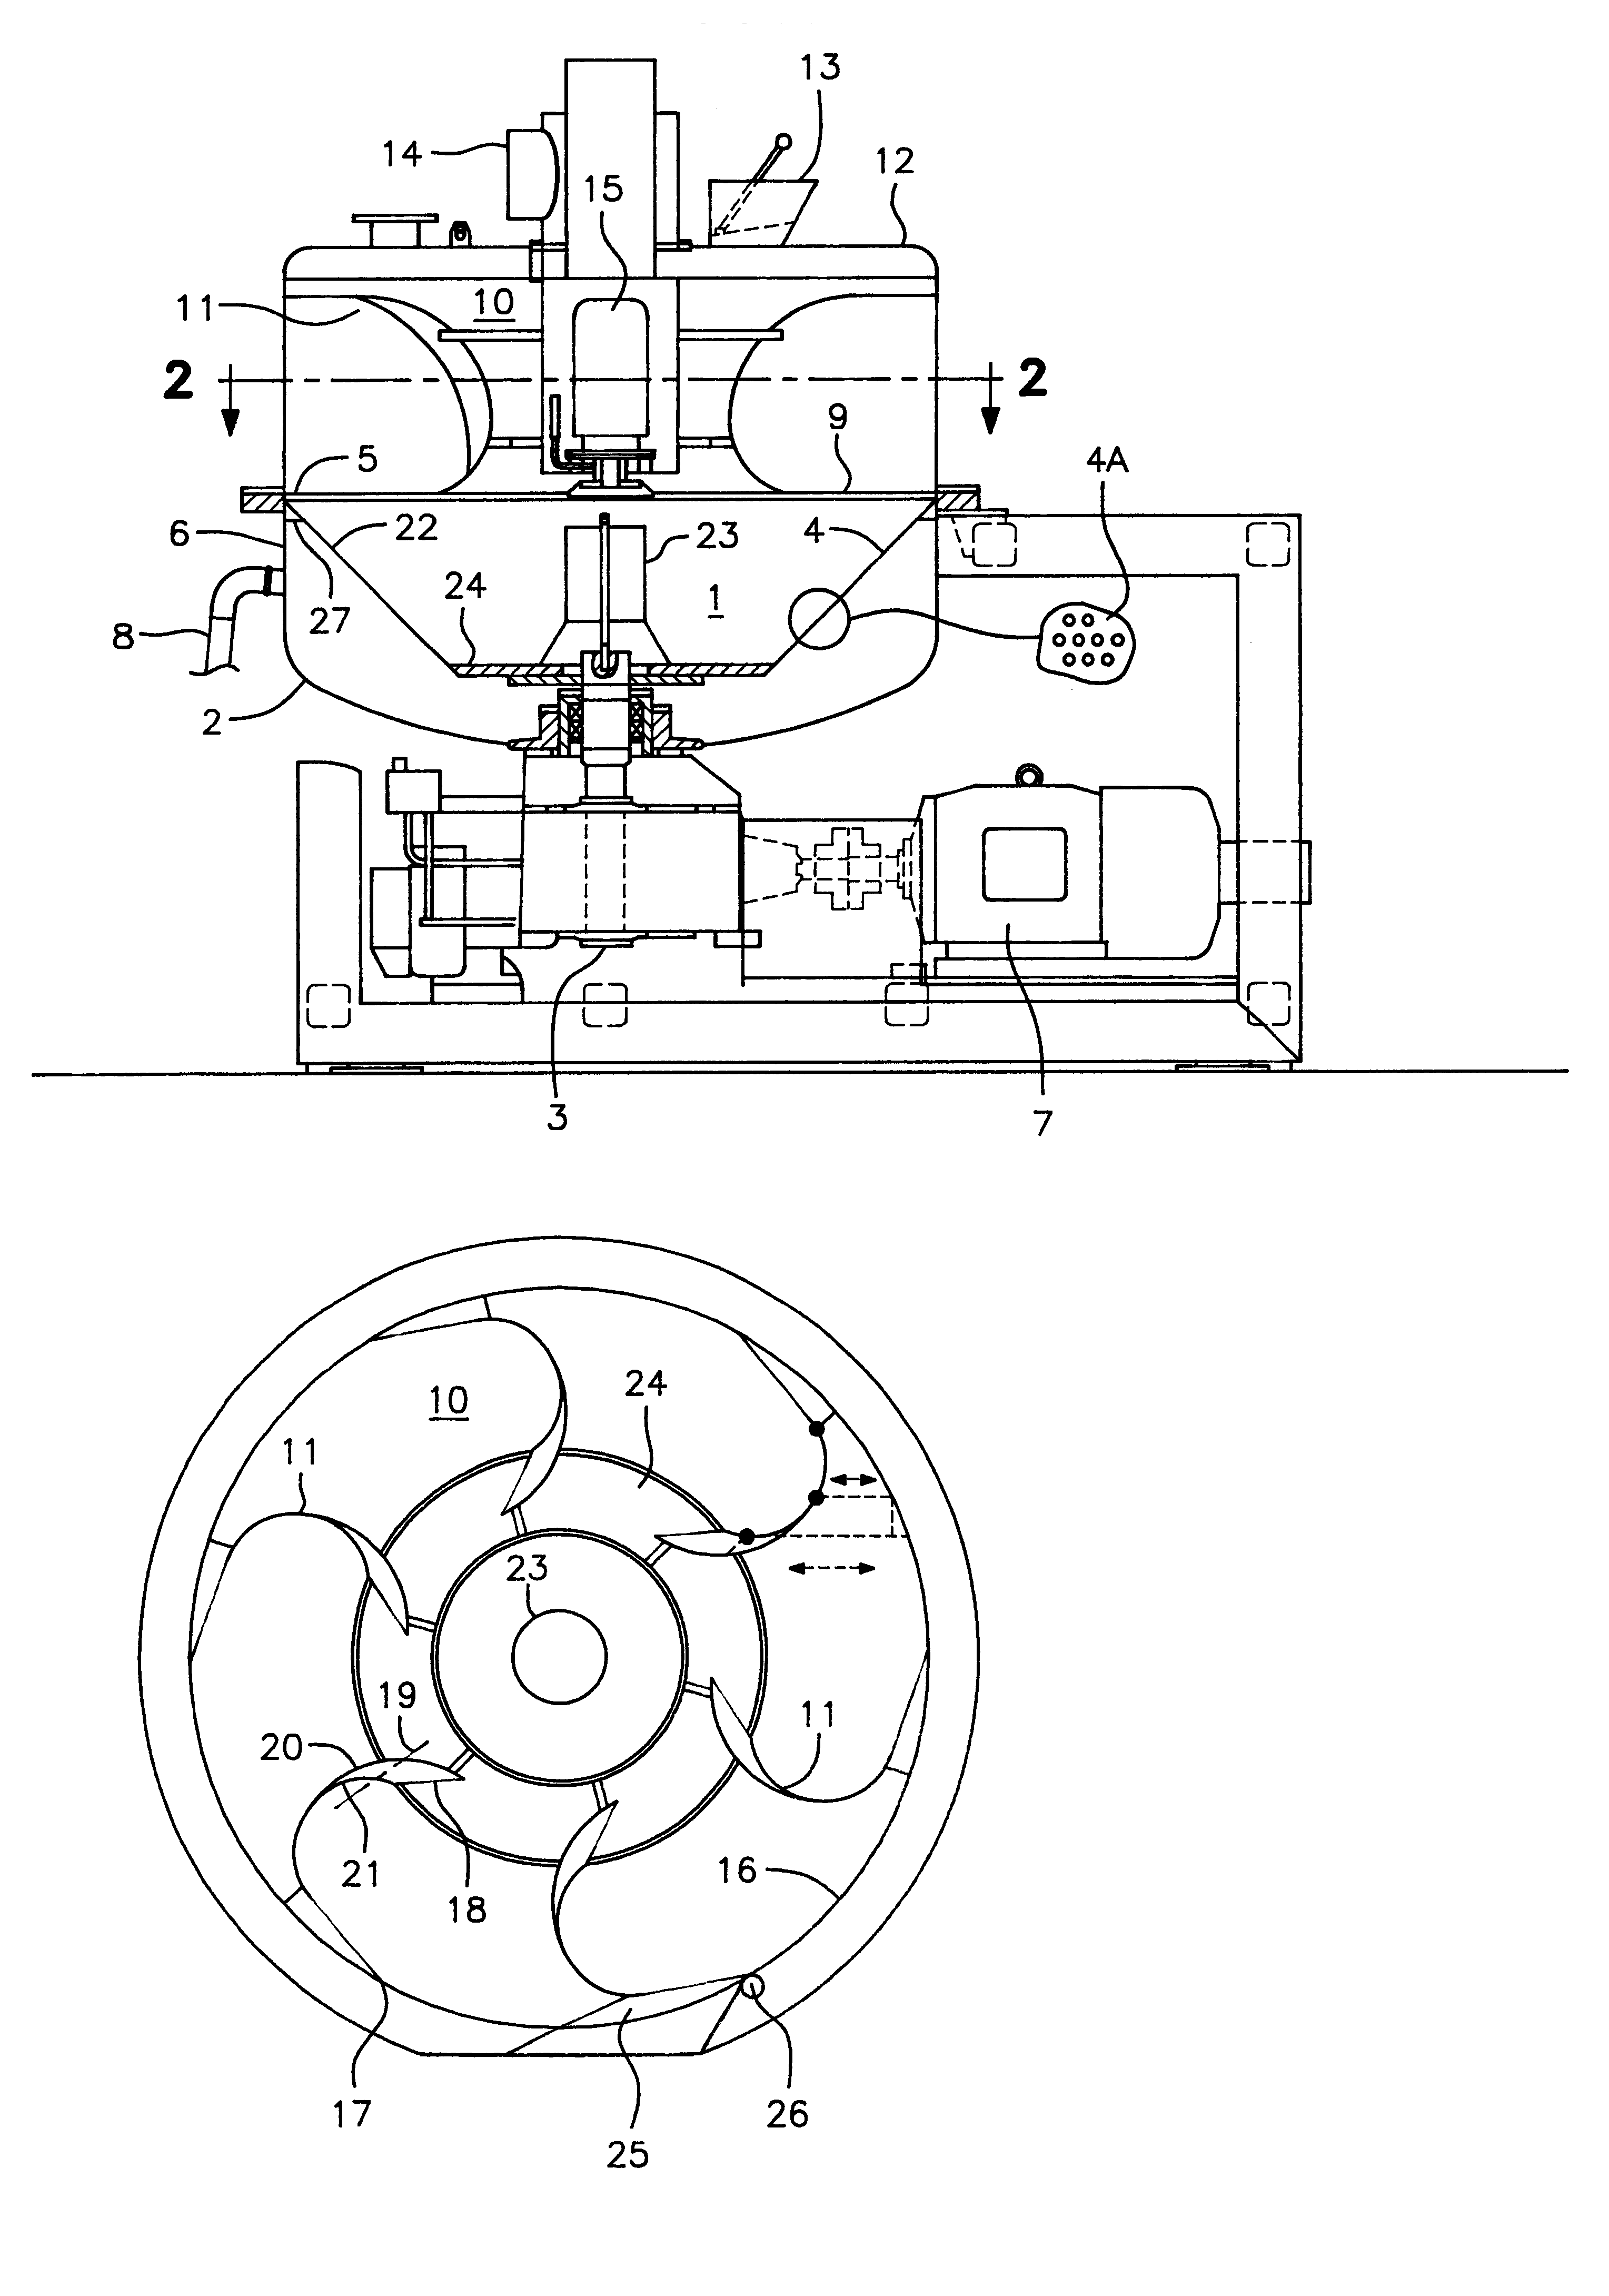 Device for producing a pourable product with a guide vane therein